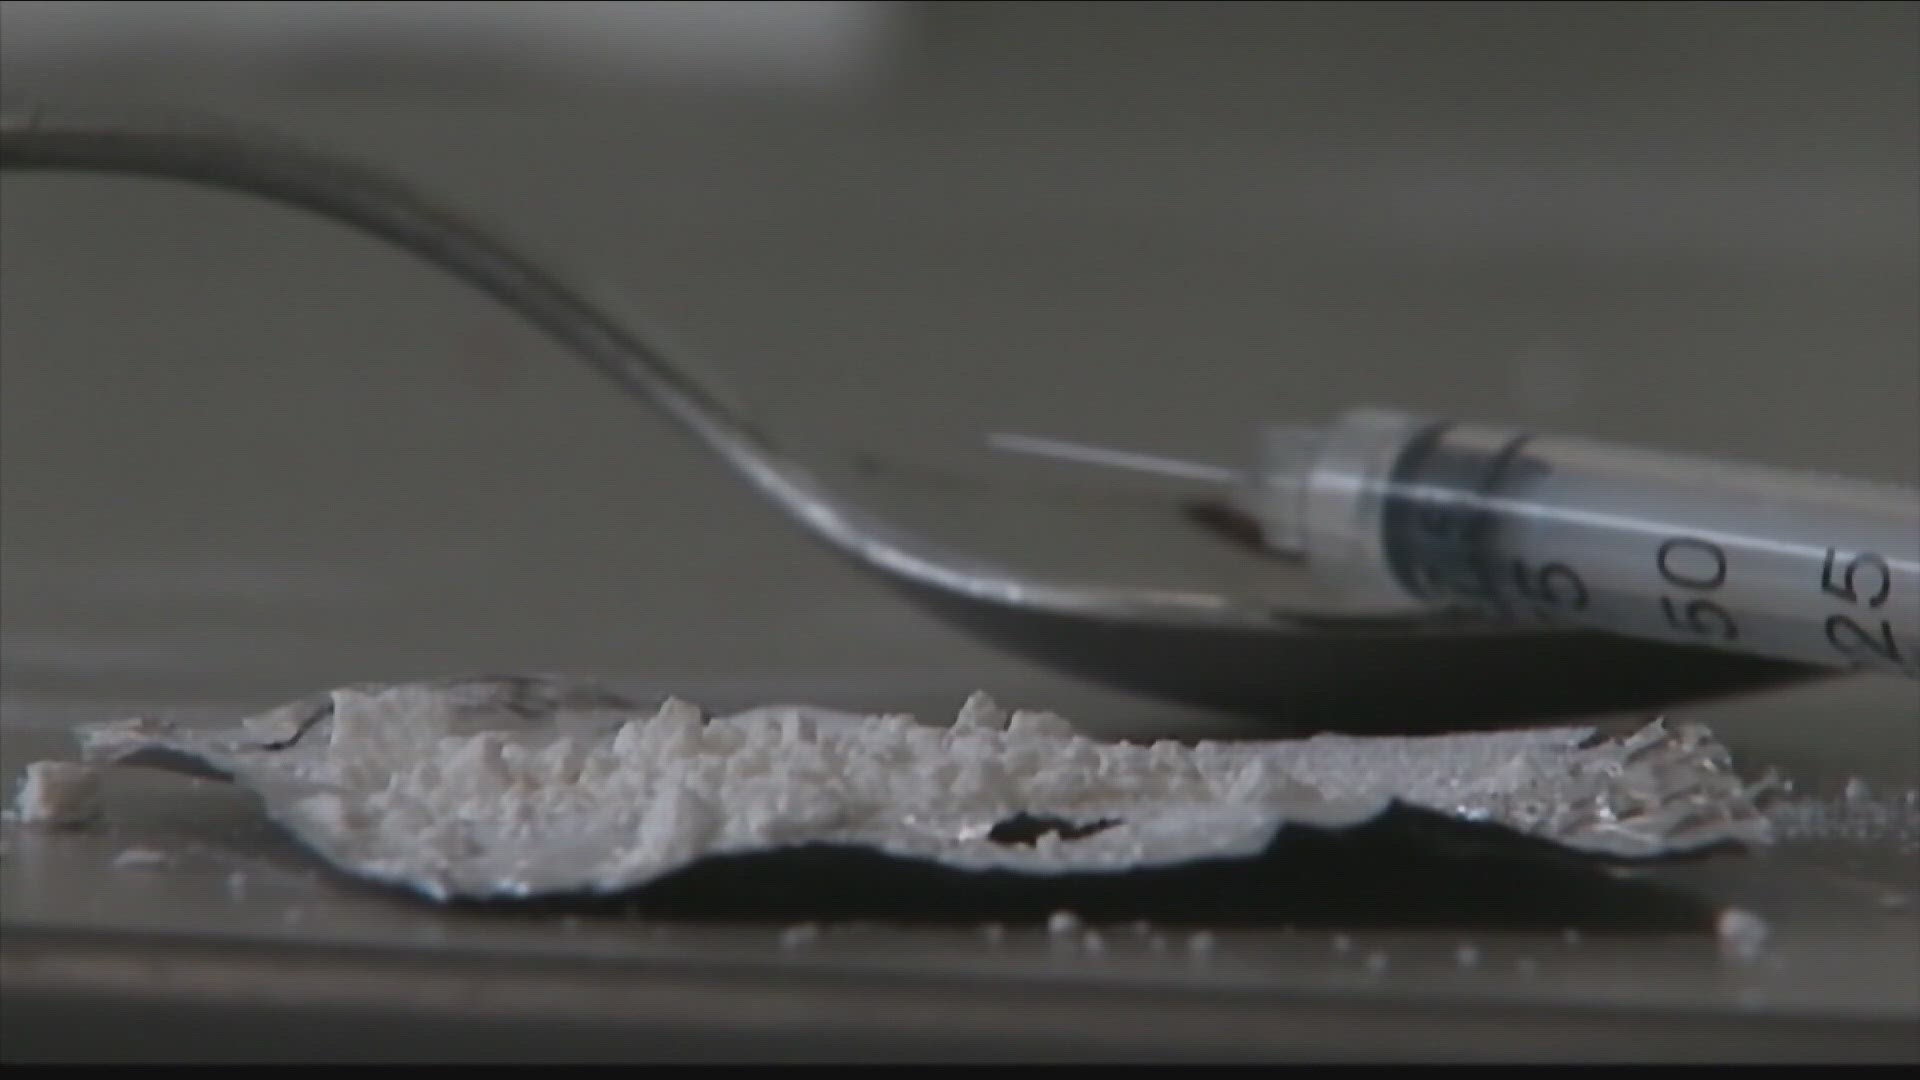 Carfentanil hits faster and lasts longer than fentanyl.. and the county is reminding people about the risk of using any illicit drugs.